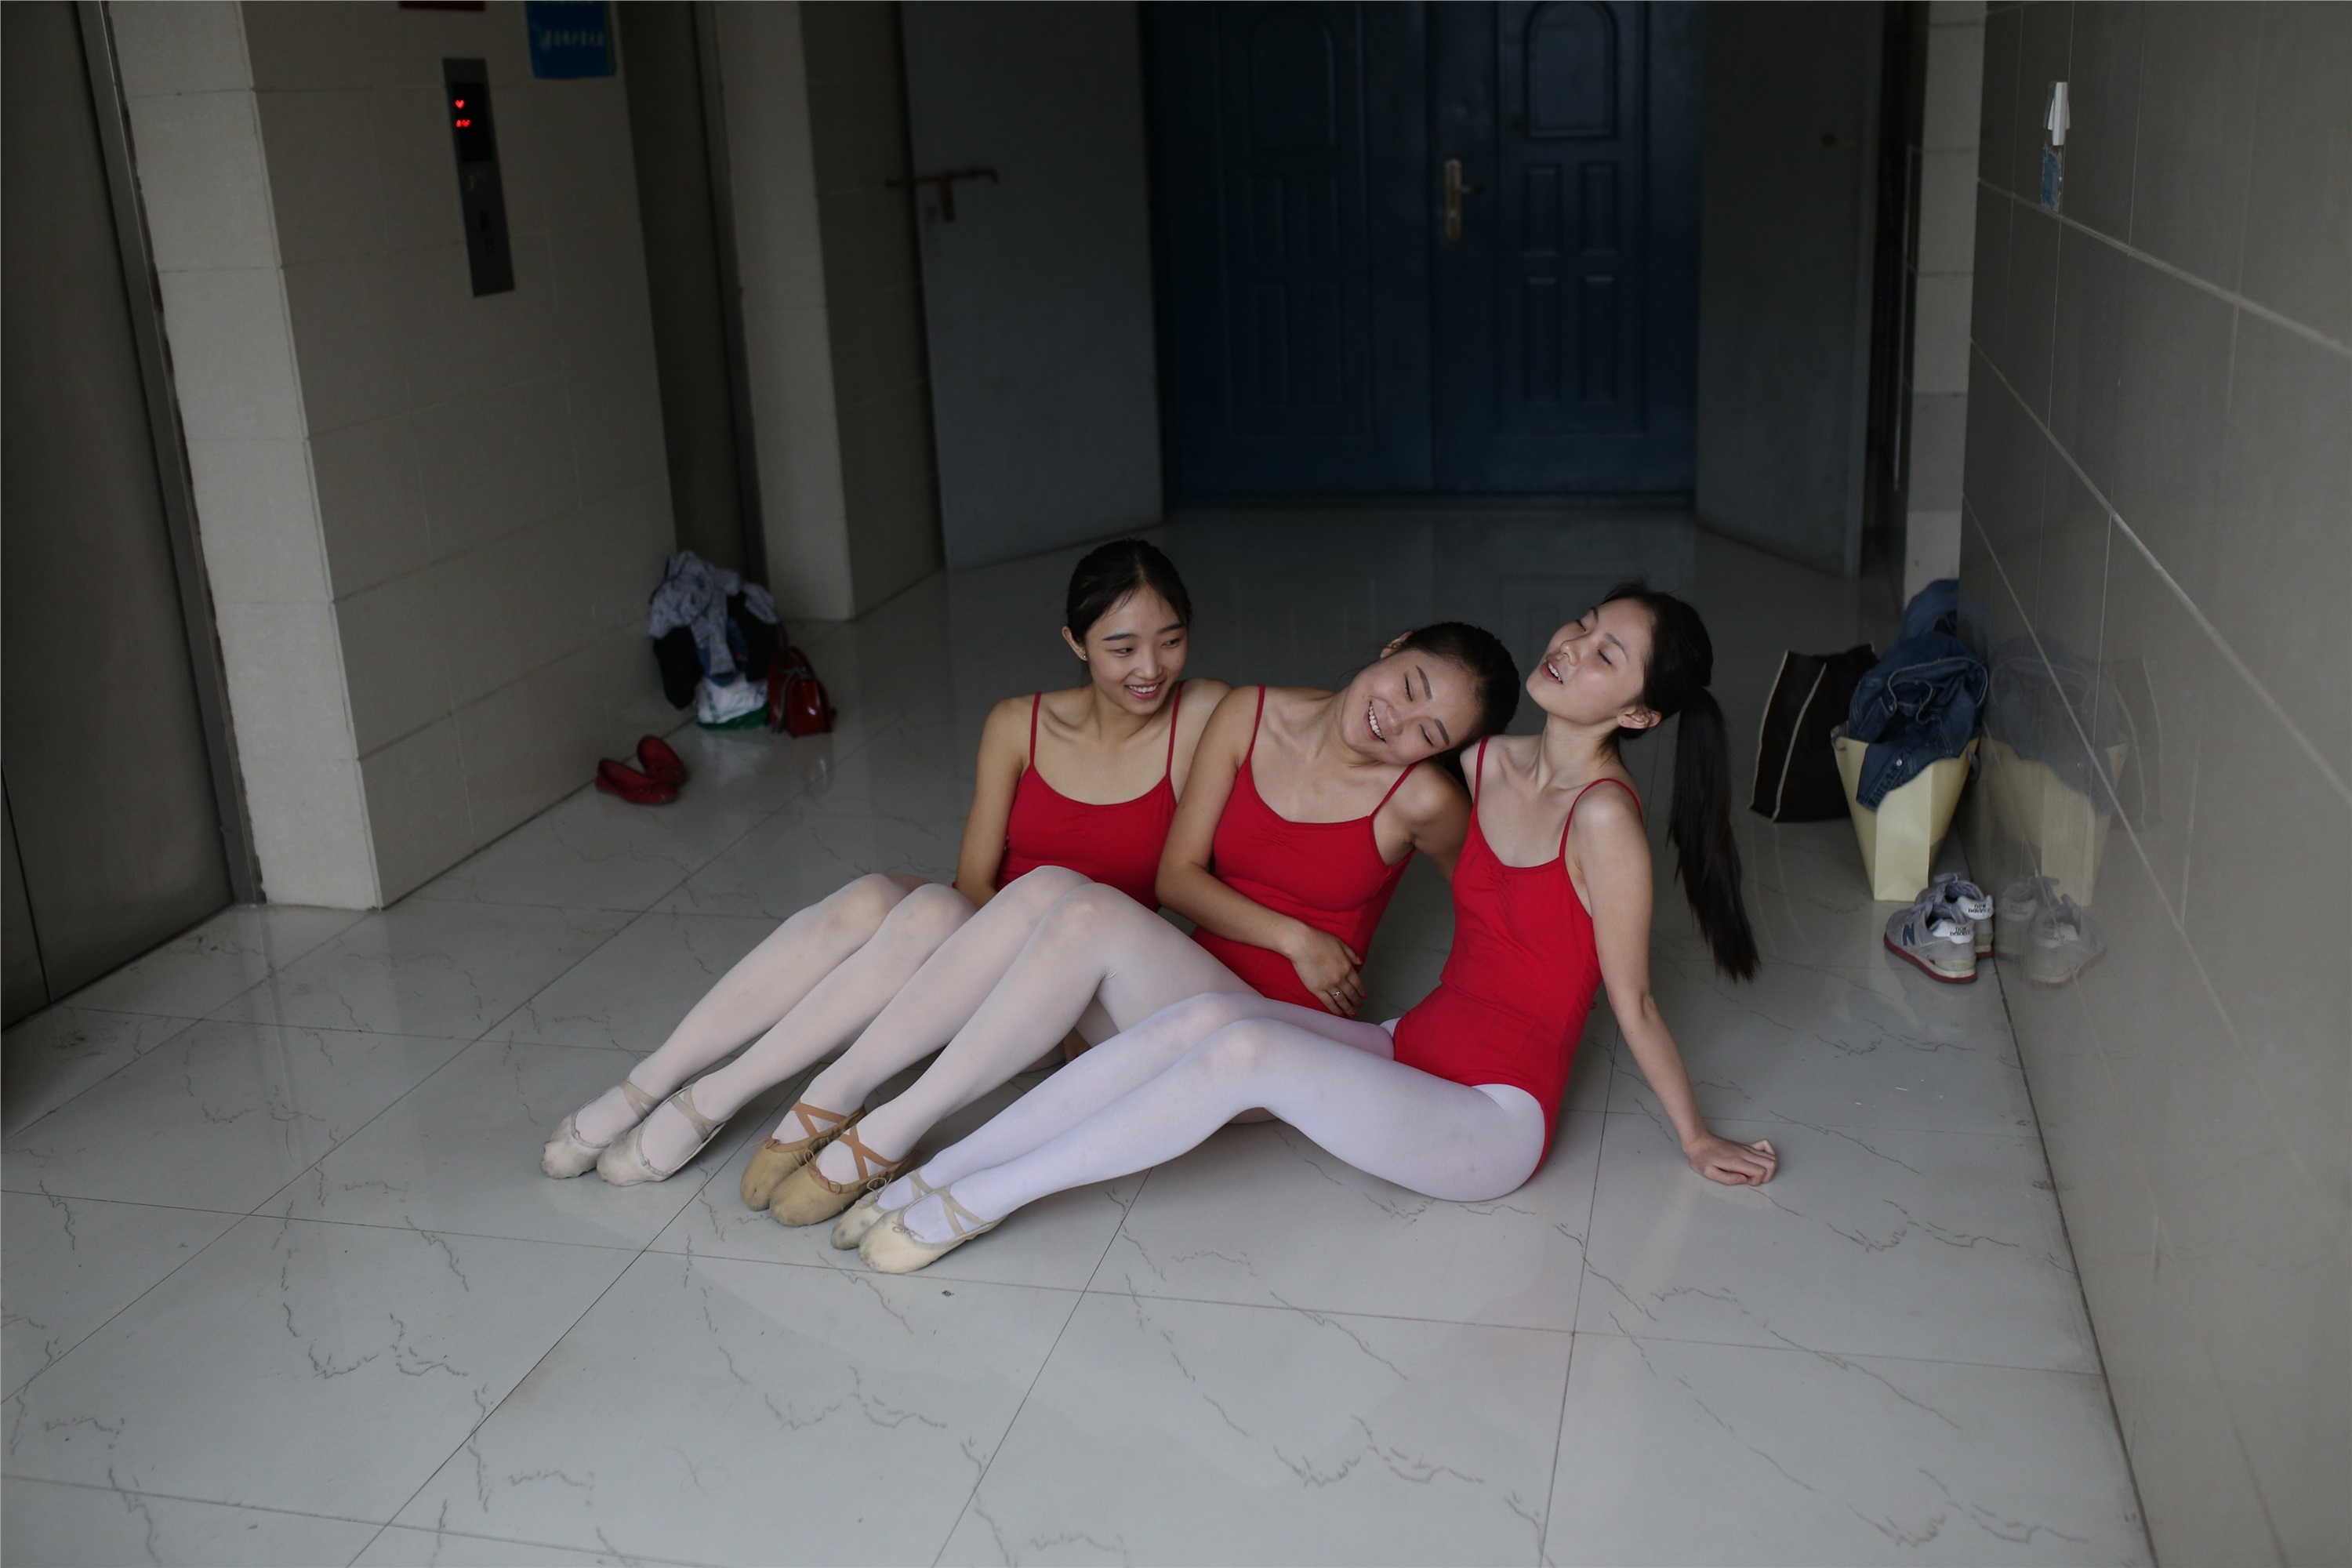 W016 dancer 6 - three sisters in red 220p1